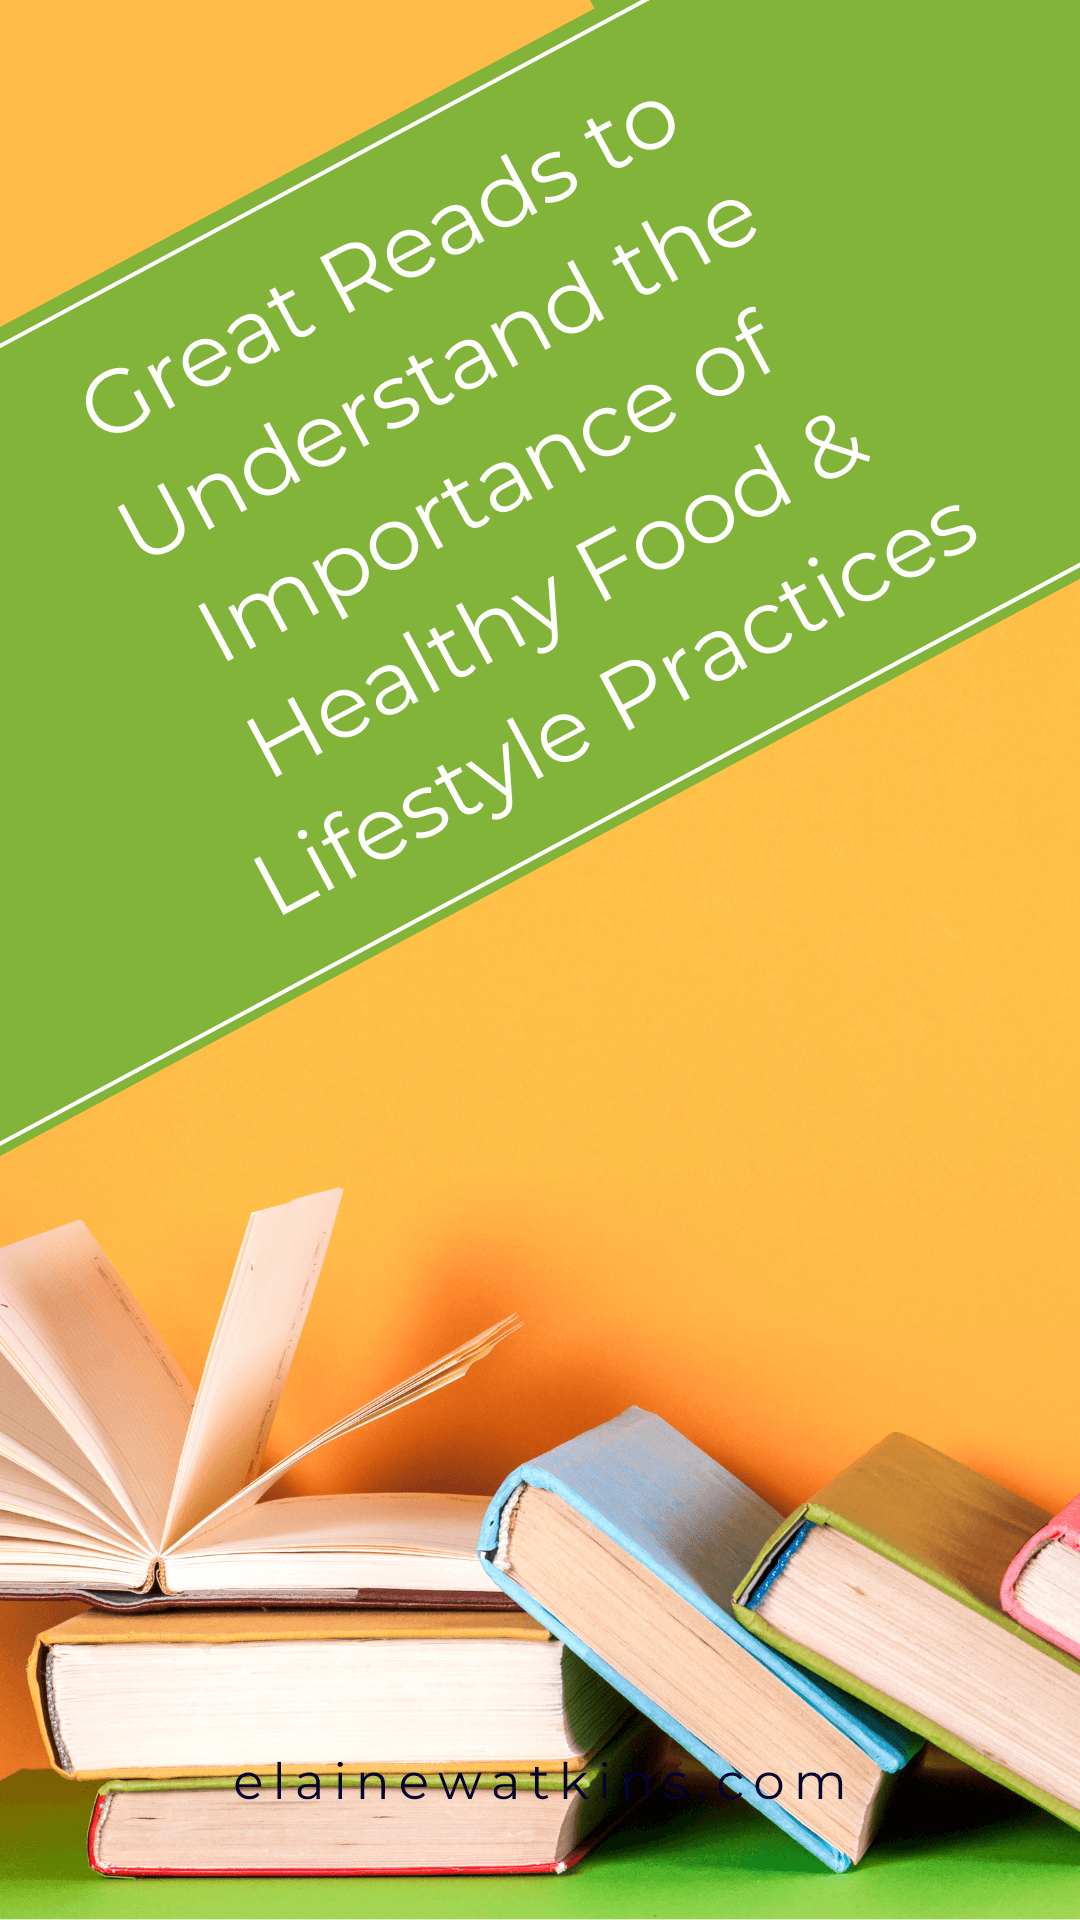 Great Reads to Better Understand the Importance of Healthy Food and Lifestyle Practices